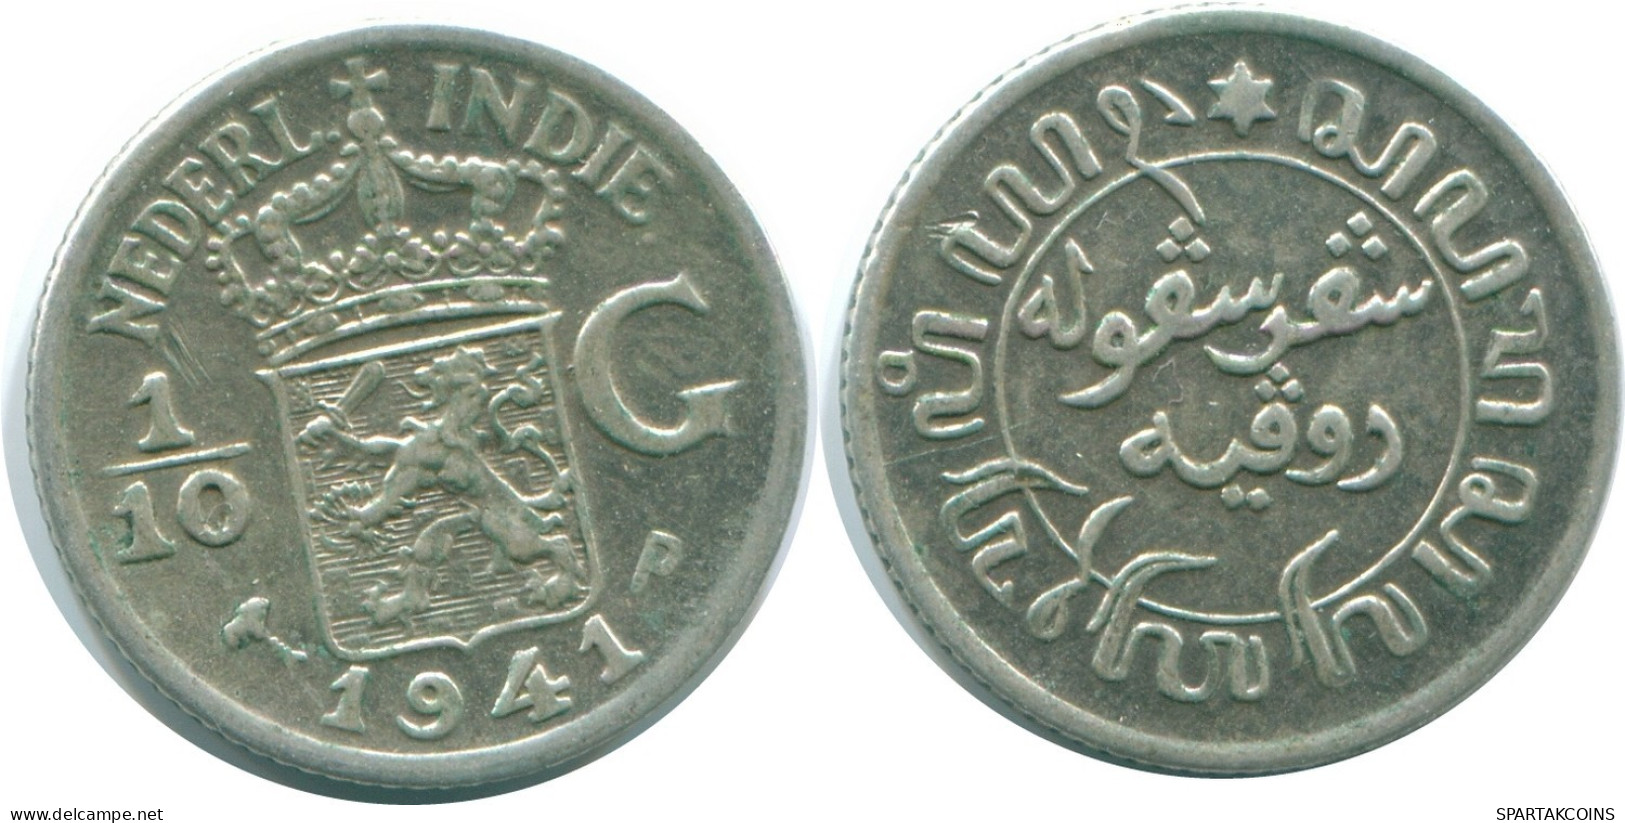 1/10 GULDEN 1941 P NETHERLANDS EAST INDIES SILVER Colonial Coin #NL13617.3.U.A - Dutch East Indies